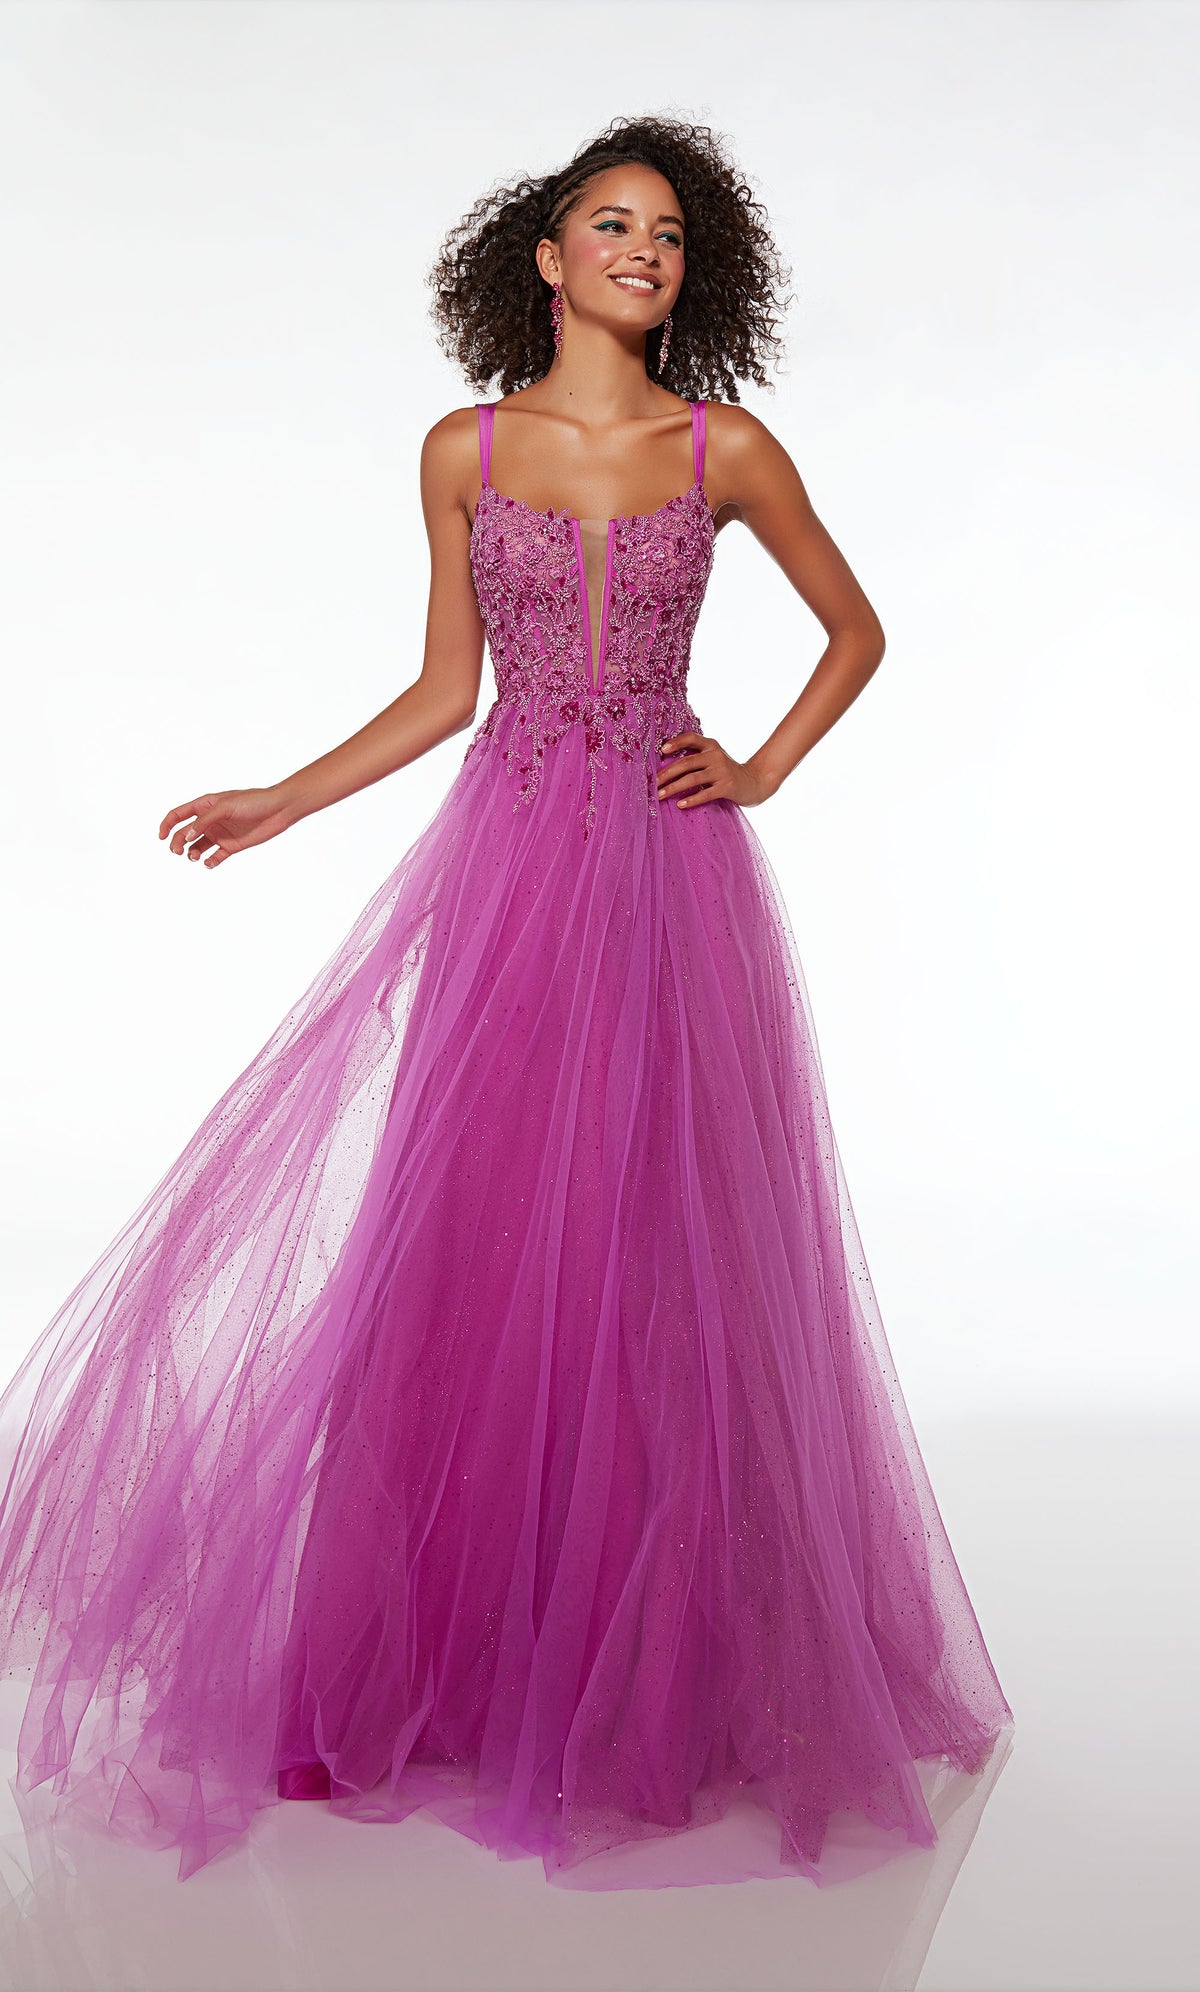 Gorgeous purple prom dress in glitter tulle, adorned with an romantic lace corset top, floral lace appliques, high slit, lace-up back, and an graceful train.